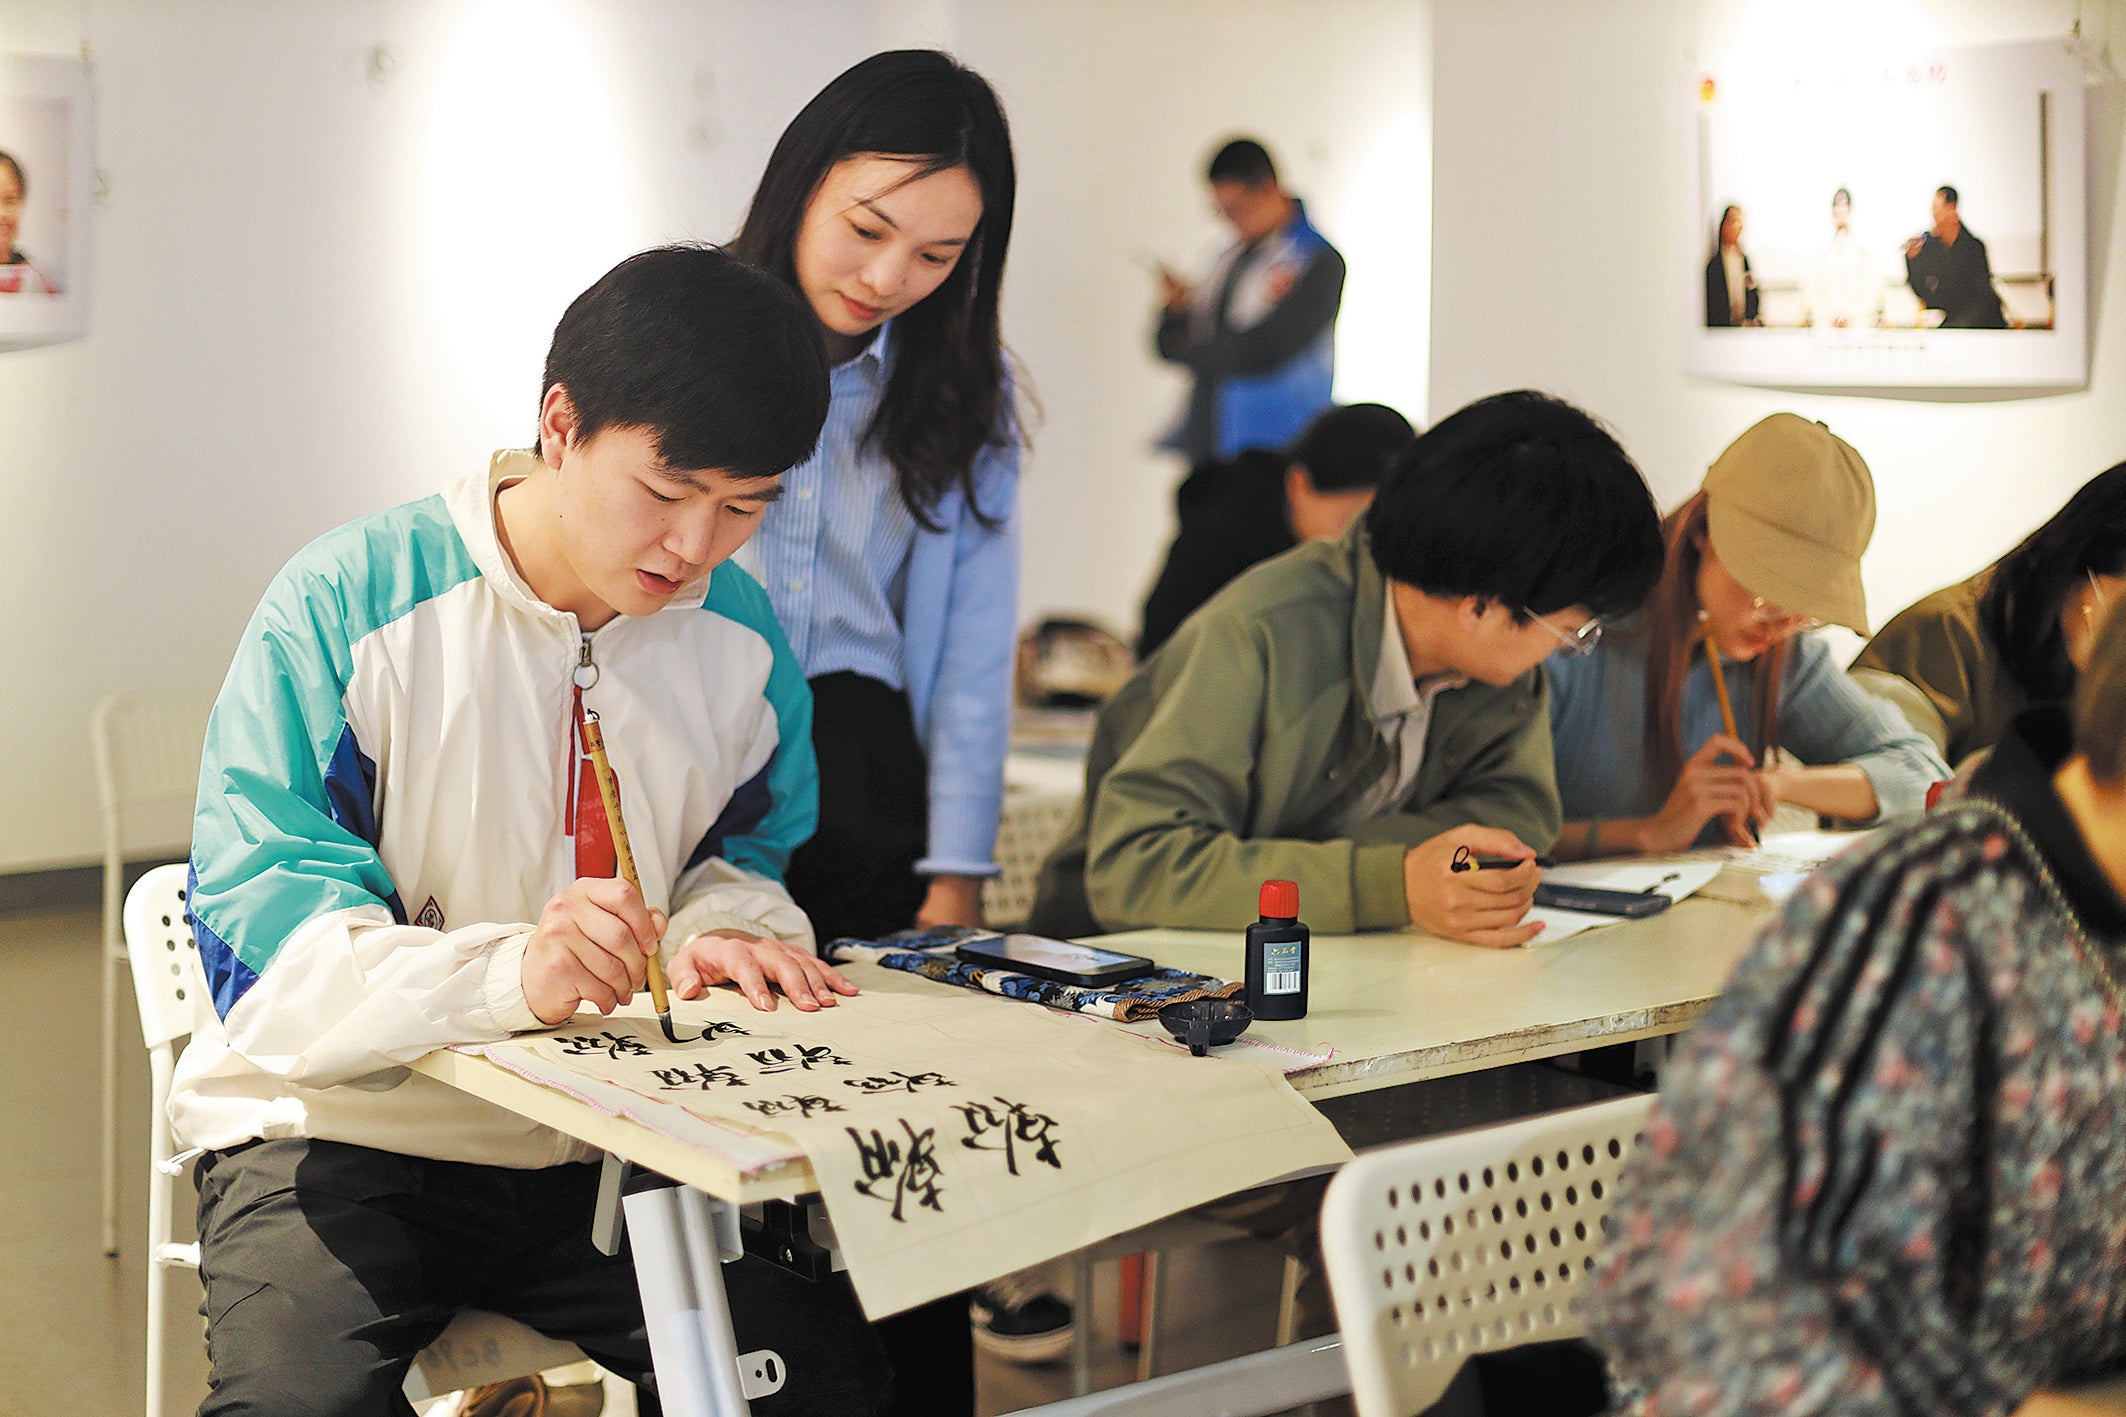 Students practise calligraphy at Guanyinqiao Night School in Chongqing in April